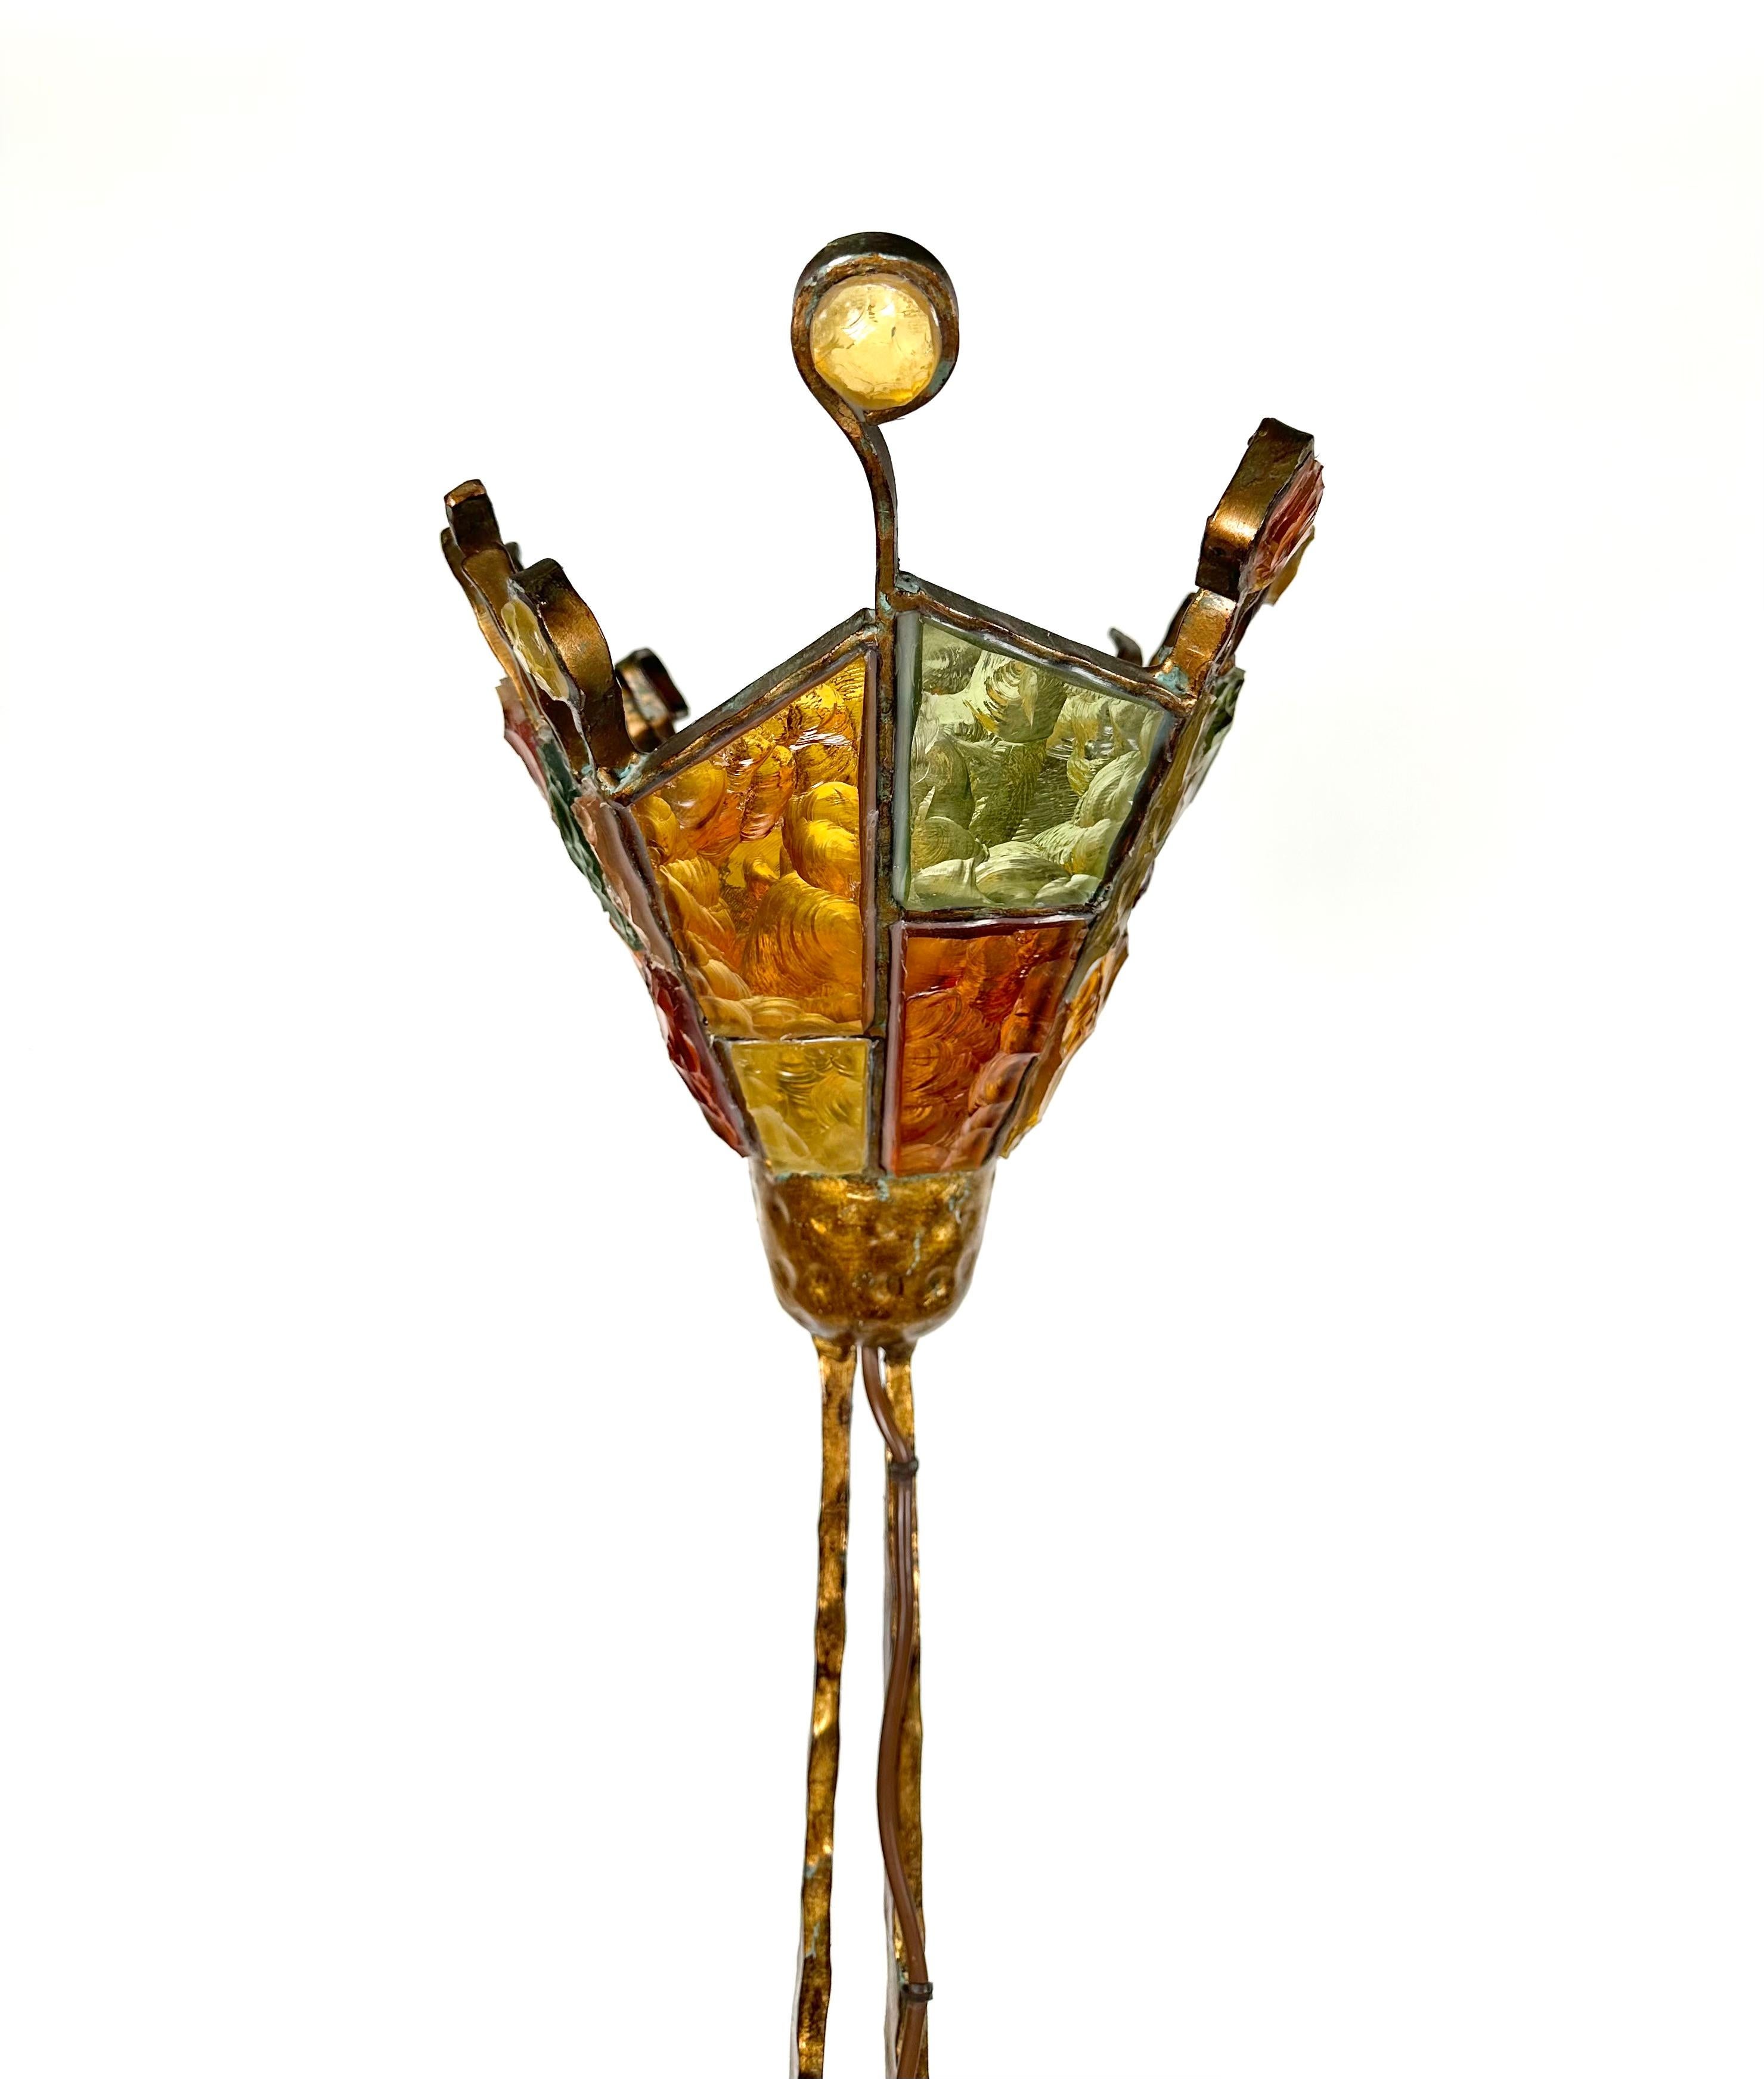 Metal Brutalist Iron and Art Glass Floor Lamp Albano Poli for Poliarte, Italy 1970s For Sale